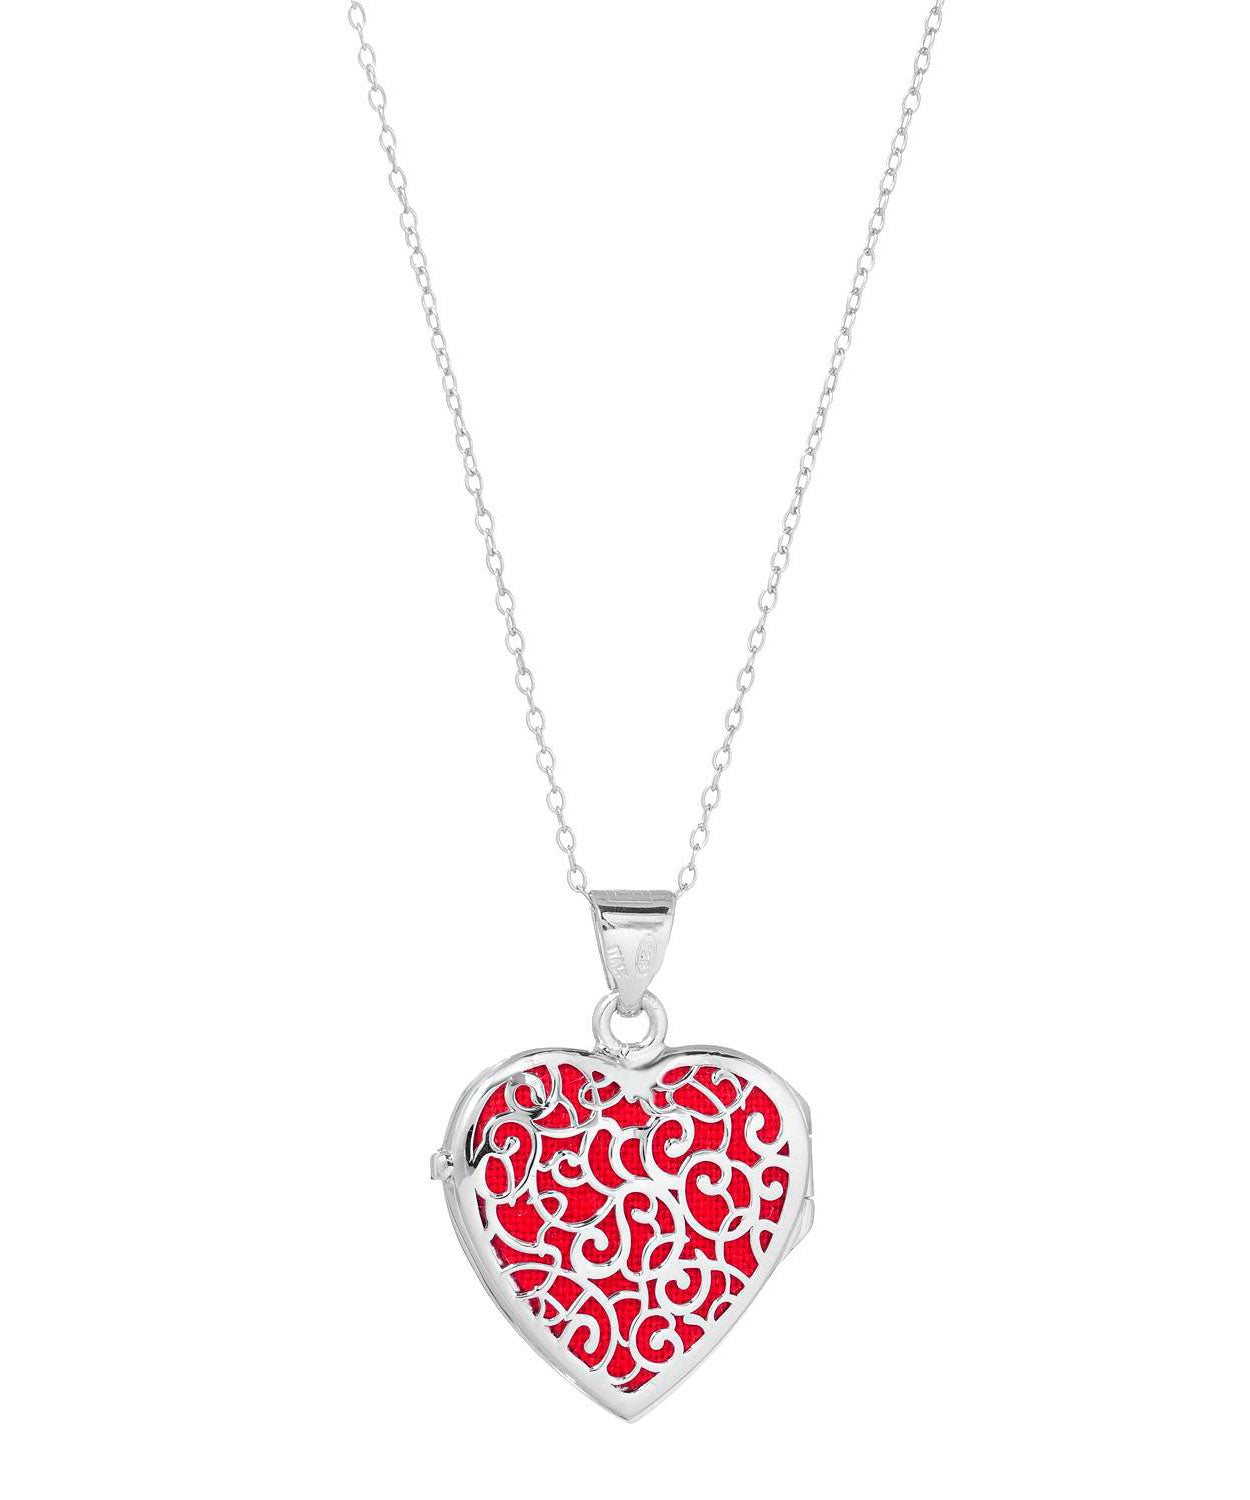 Patterns of Love Collection Brilliant Cut Cubic Zirconia Rhodium Plated 925 Sterling Silver Heart Locket Pendant With Chain - Made in Italy View 2